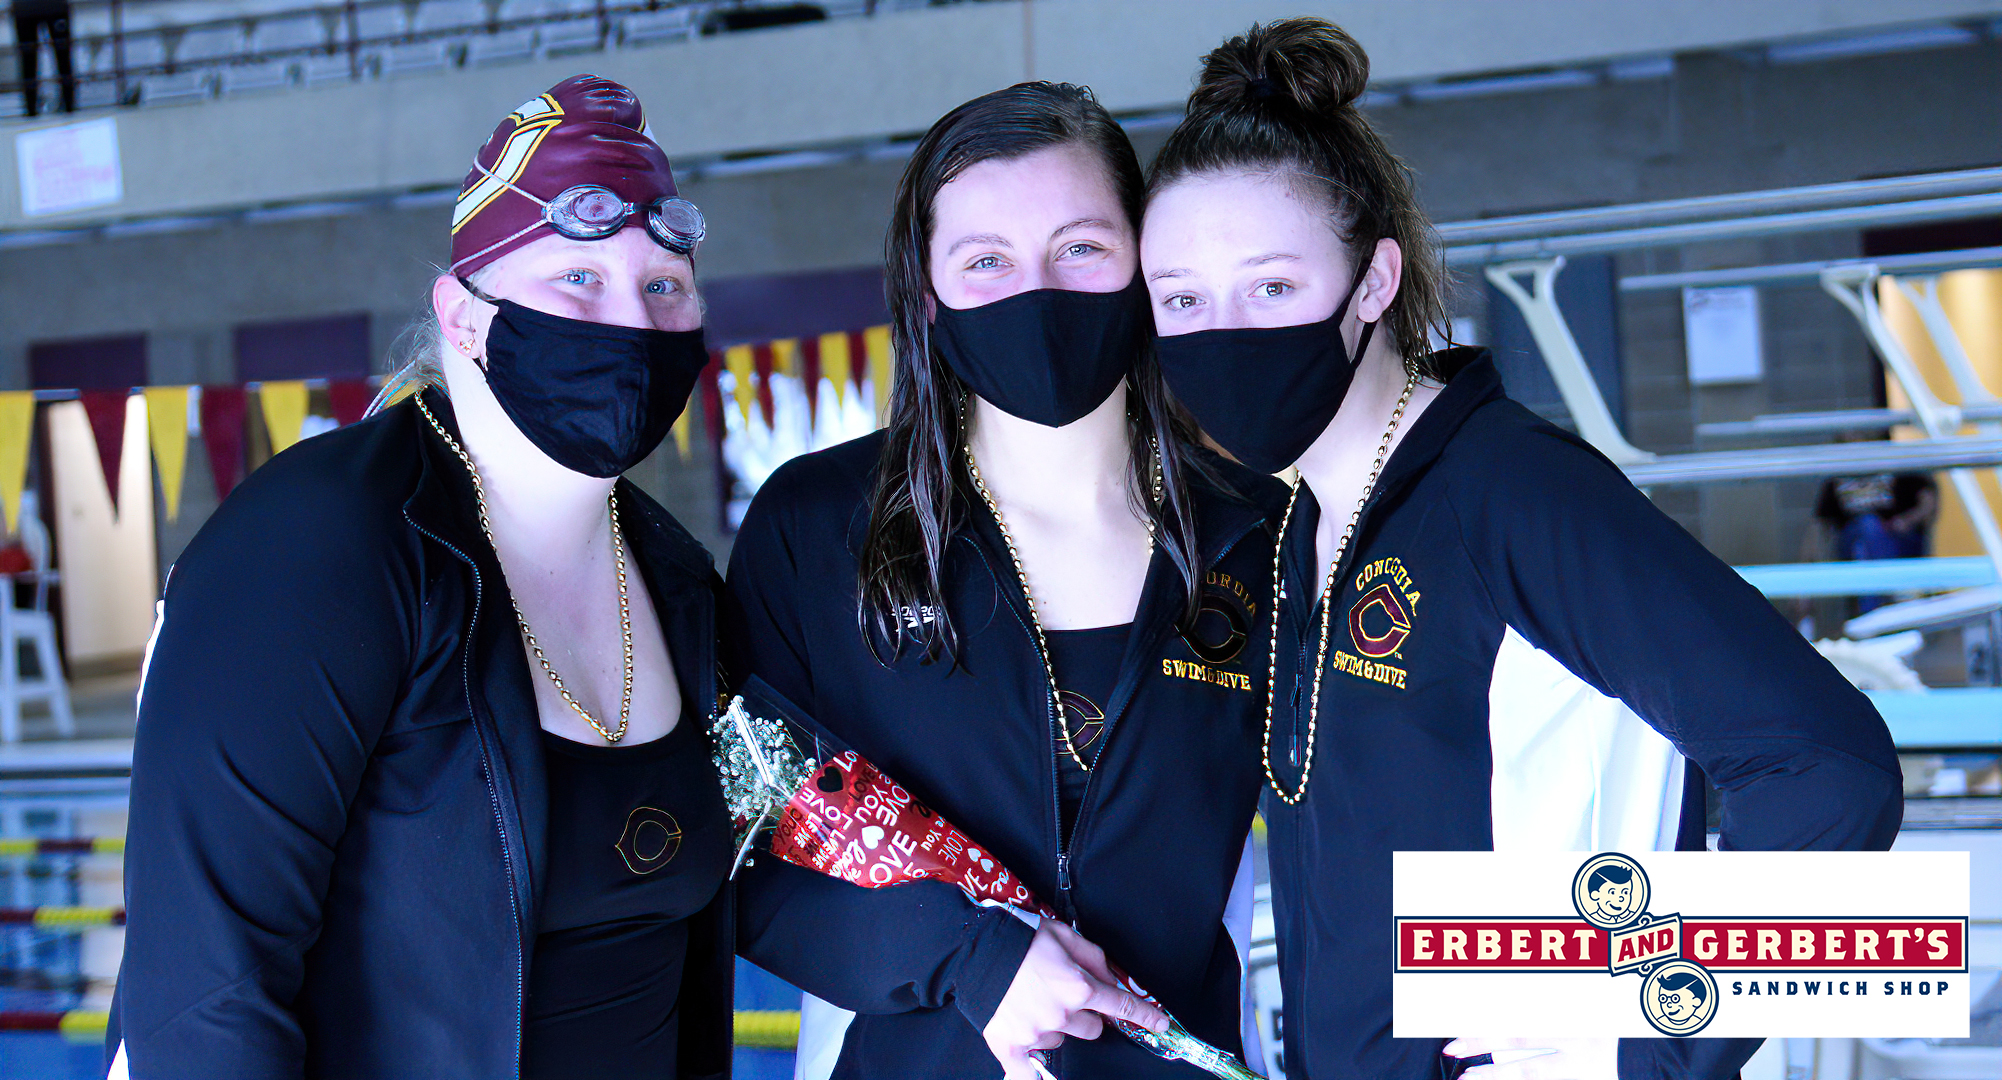 Senior Anna Backes (M) was honored by teammates, and received gifts from Lindsey Biebl (L) and Alex Rasmussen, during the Cobbers' dual meet with Augsburg. Backes won the 200 IM and 500 Free to help CC win 83-71.